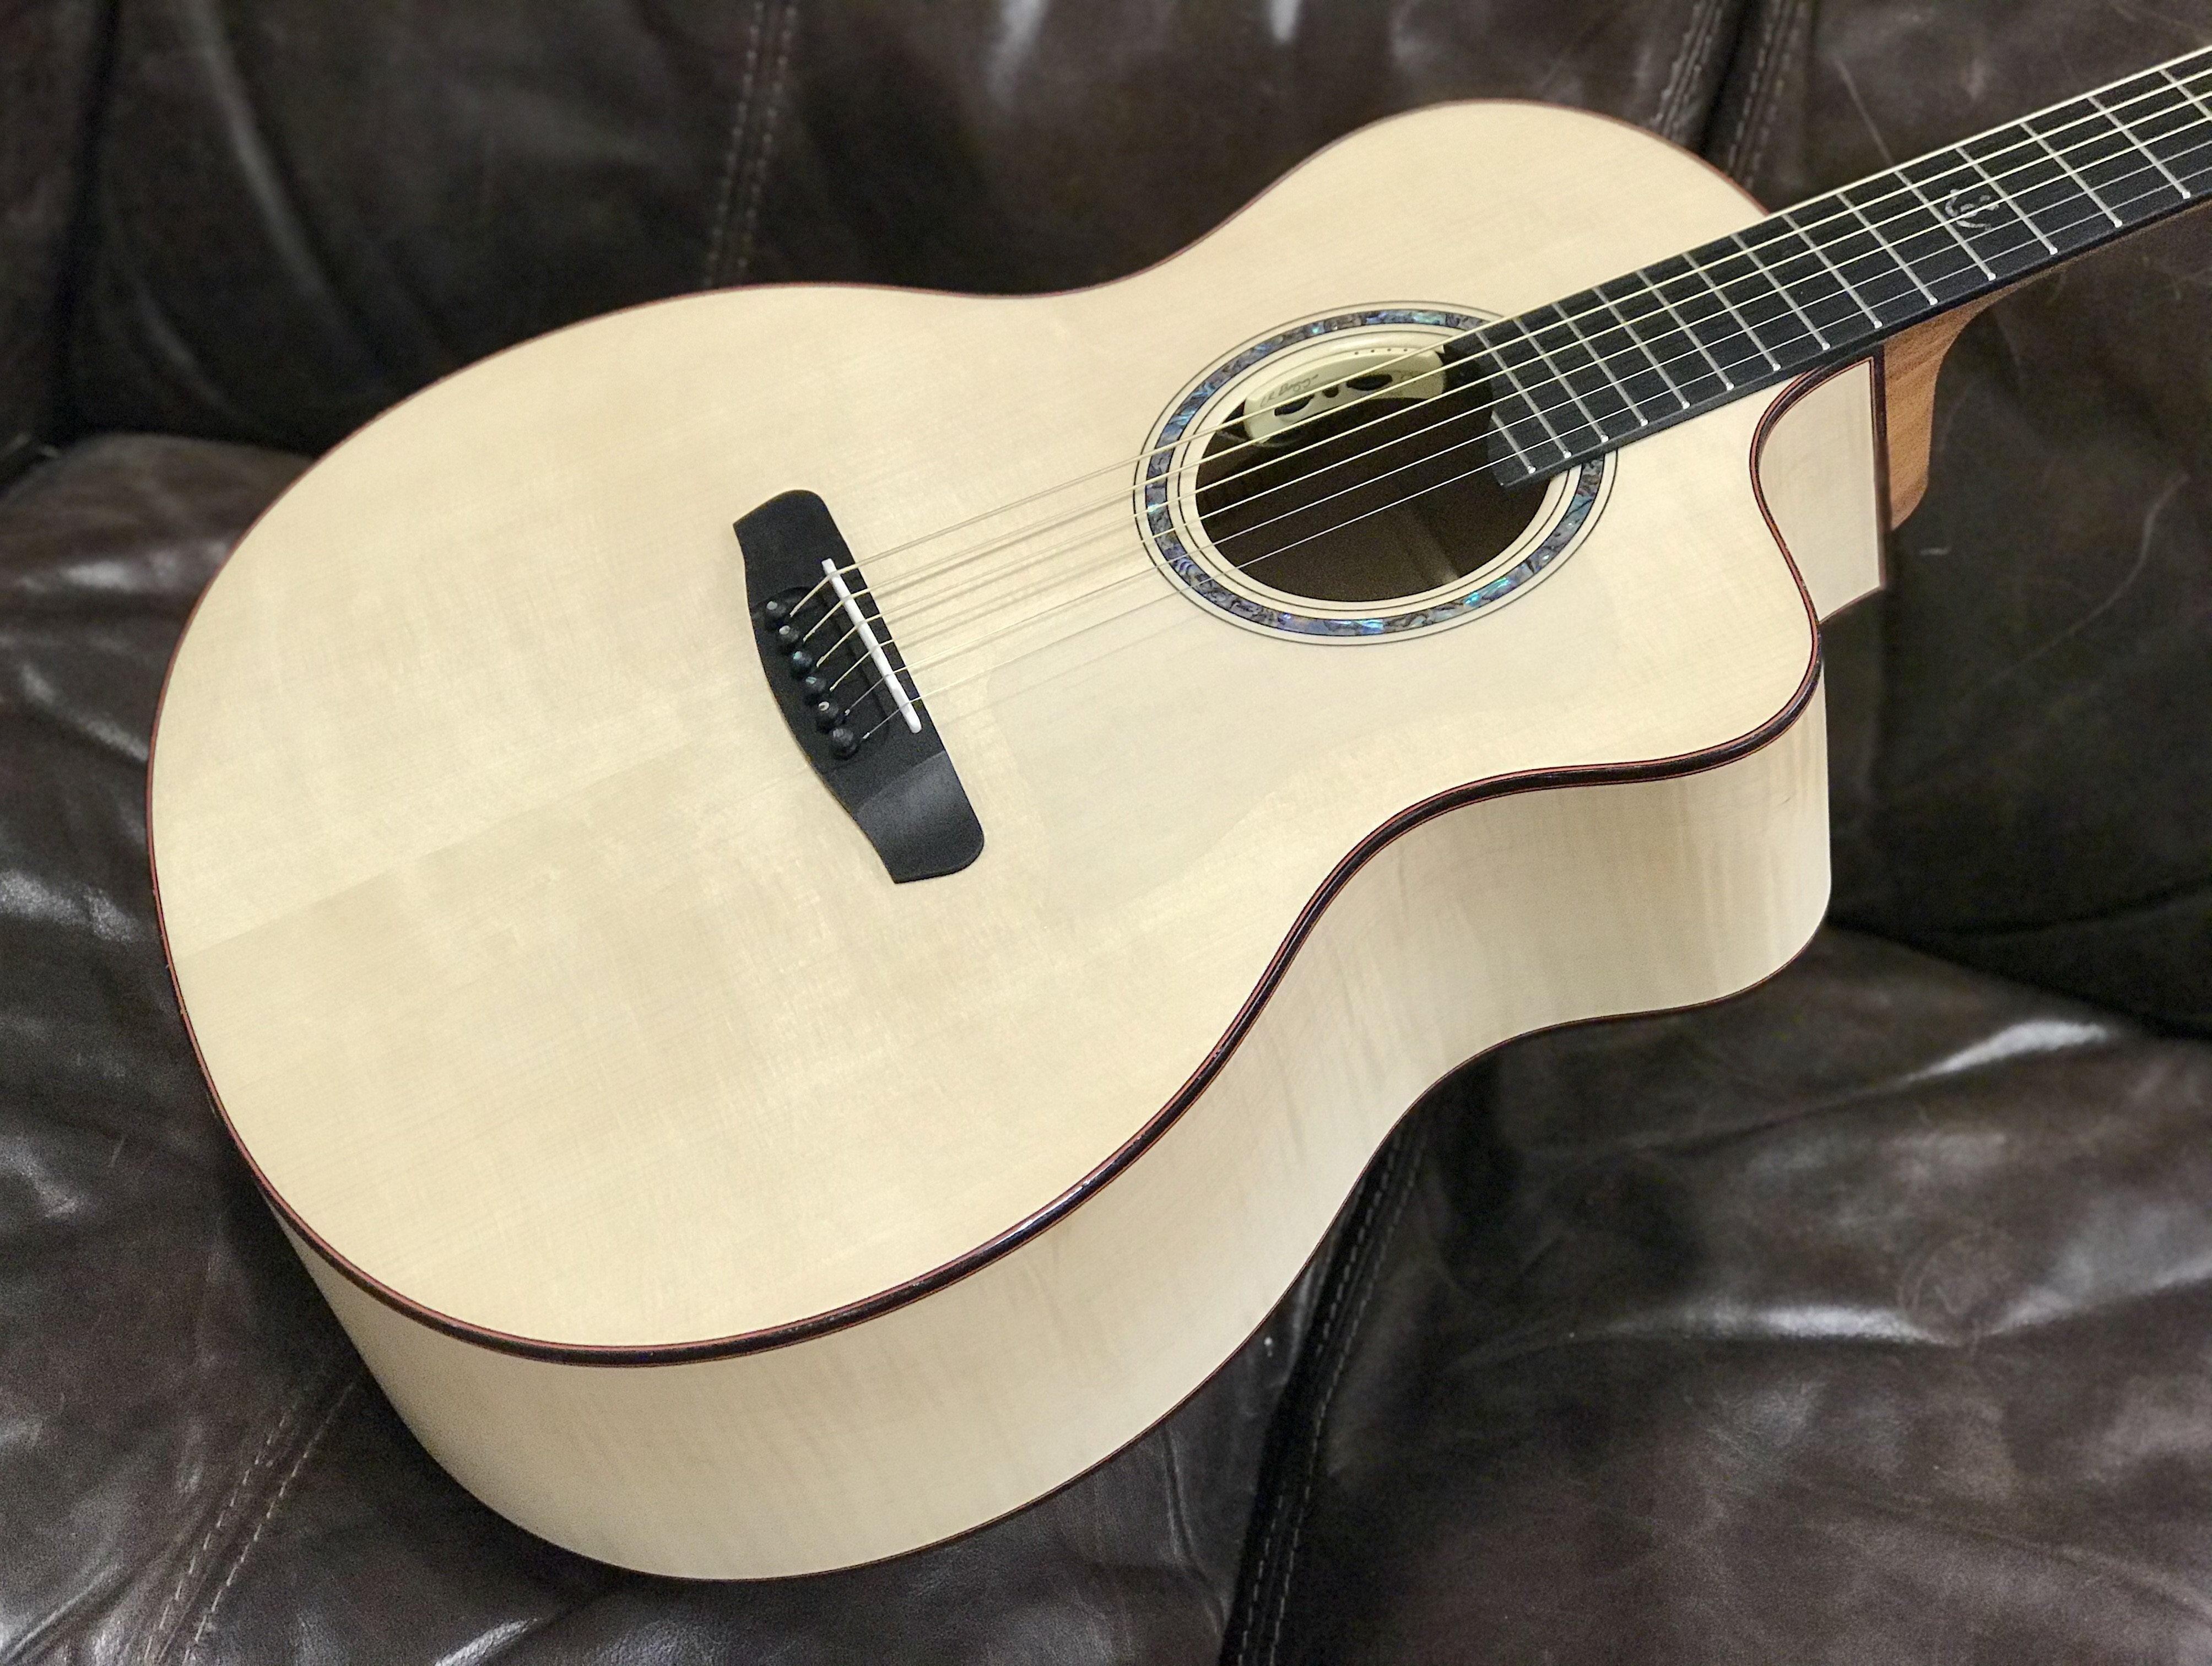 Dowina Maple / Rosewood / Maple Trio Plate (Silk Road) GAC, Acoustic Guitar for sale at Richards Guitars.